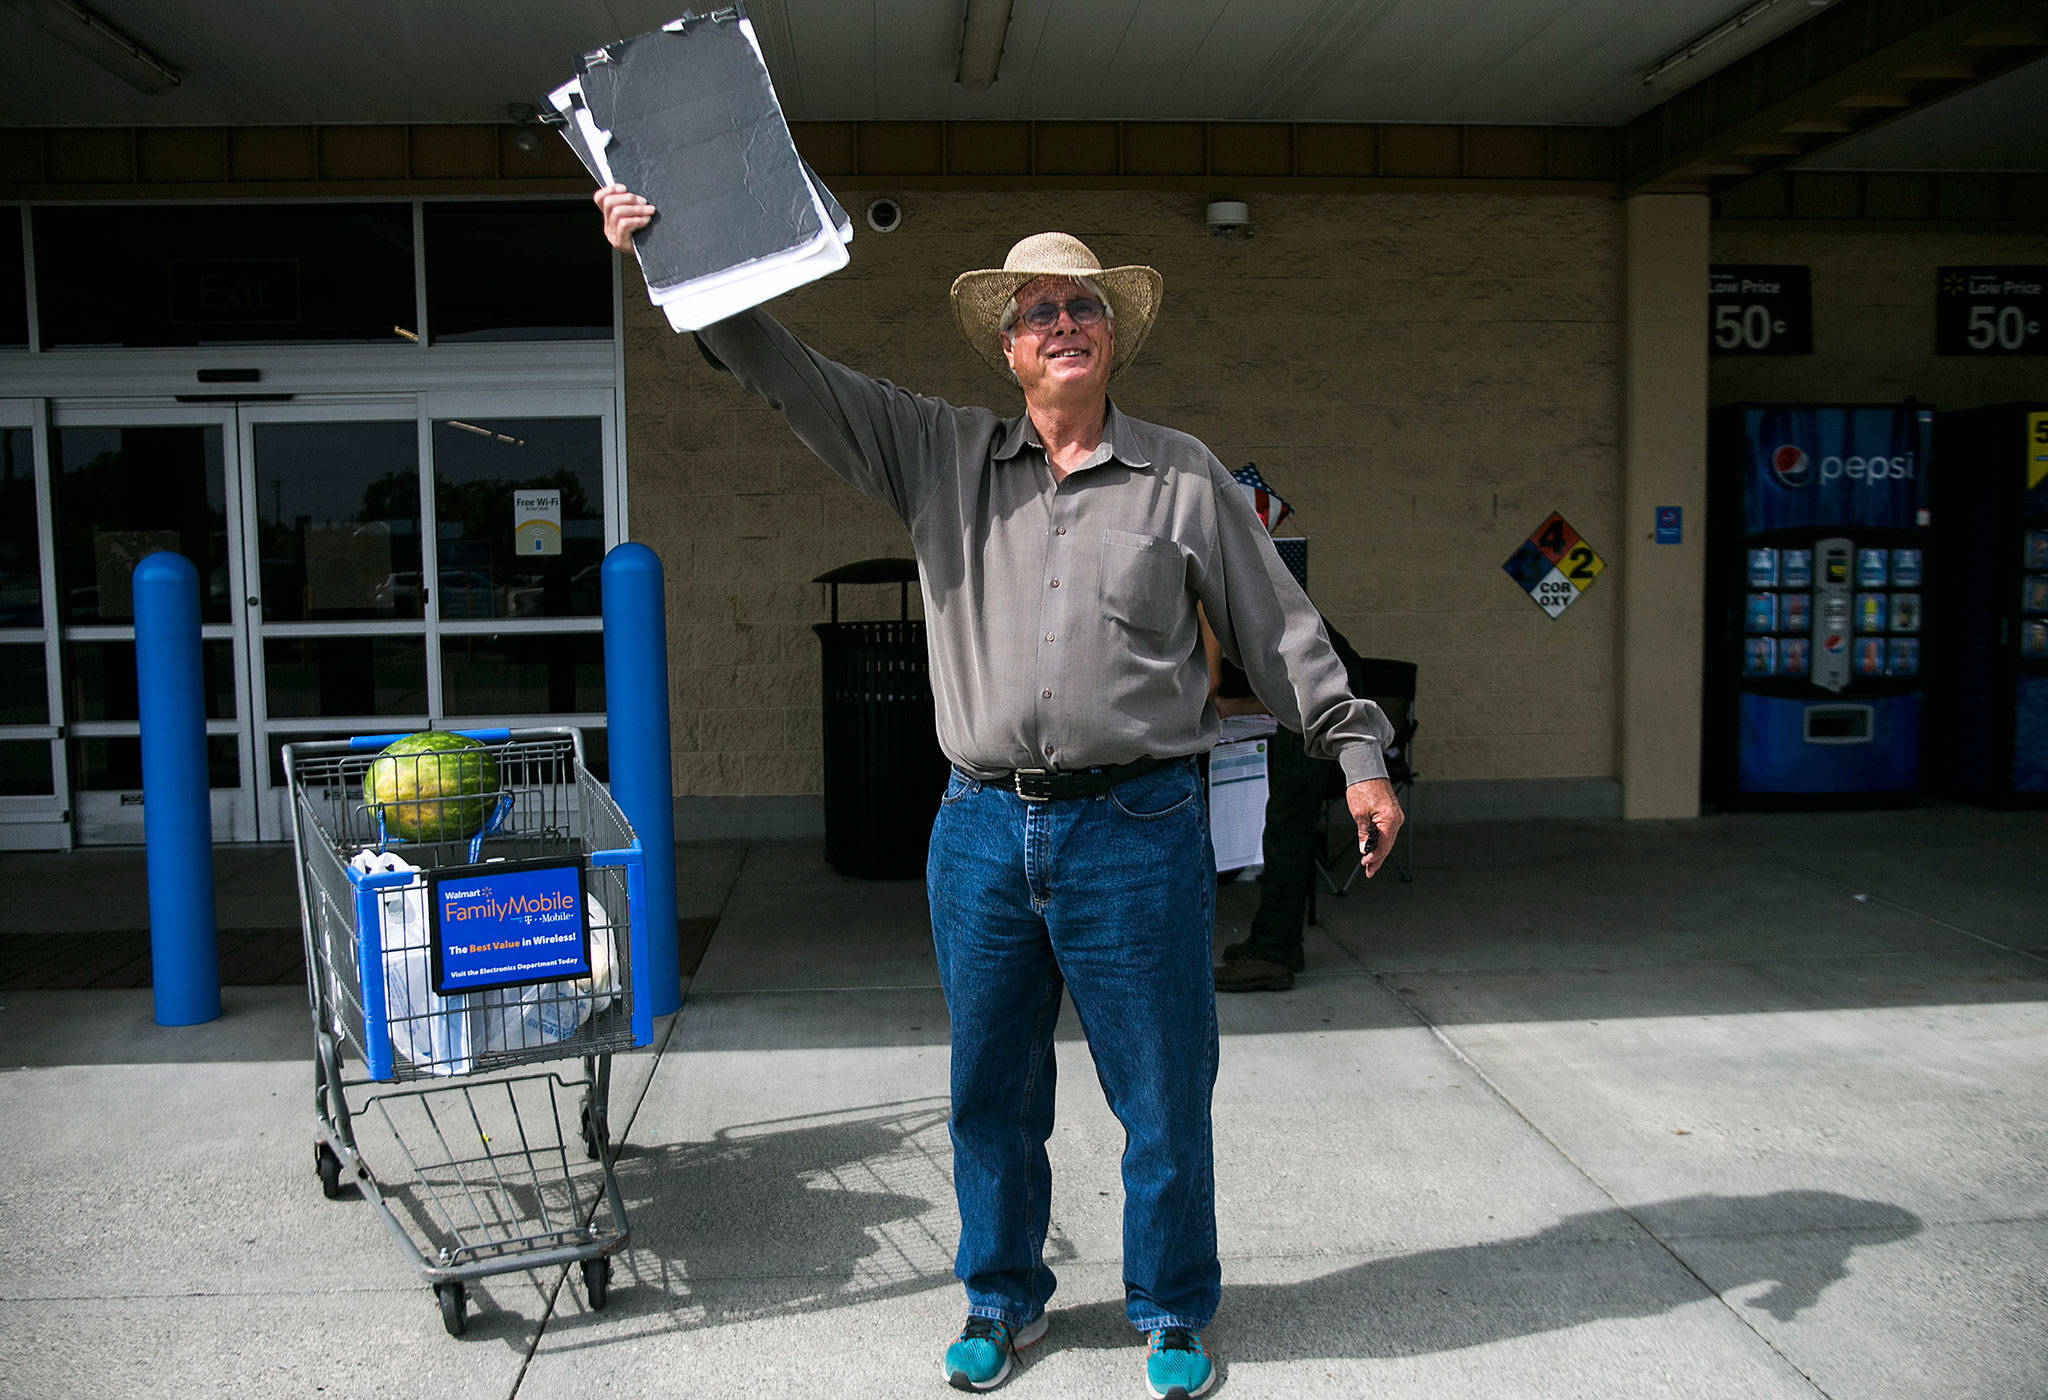 Mark Pitts waves to try to flag people down for signatures outside of Walmart last week in Everett. (Olivia Vanni / The Herald)